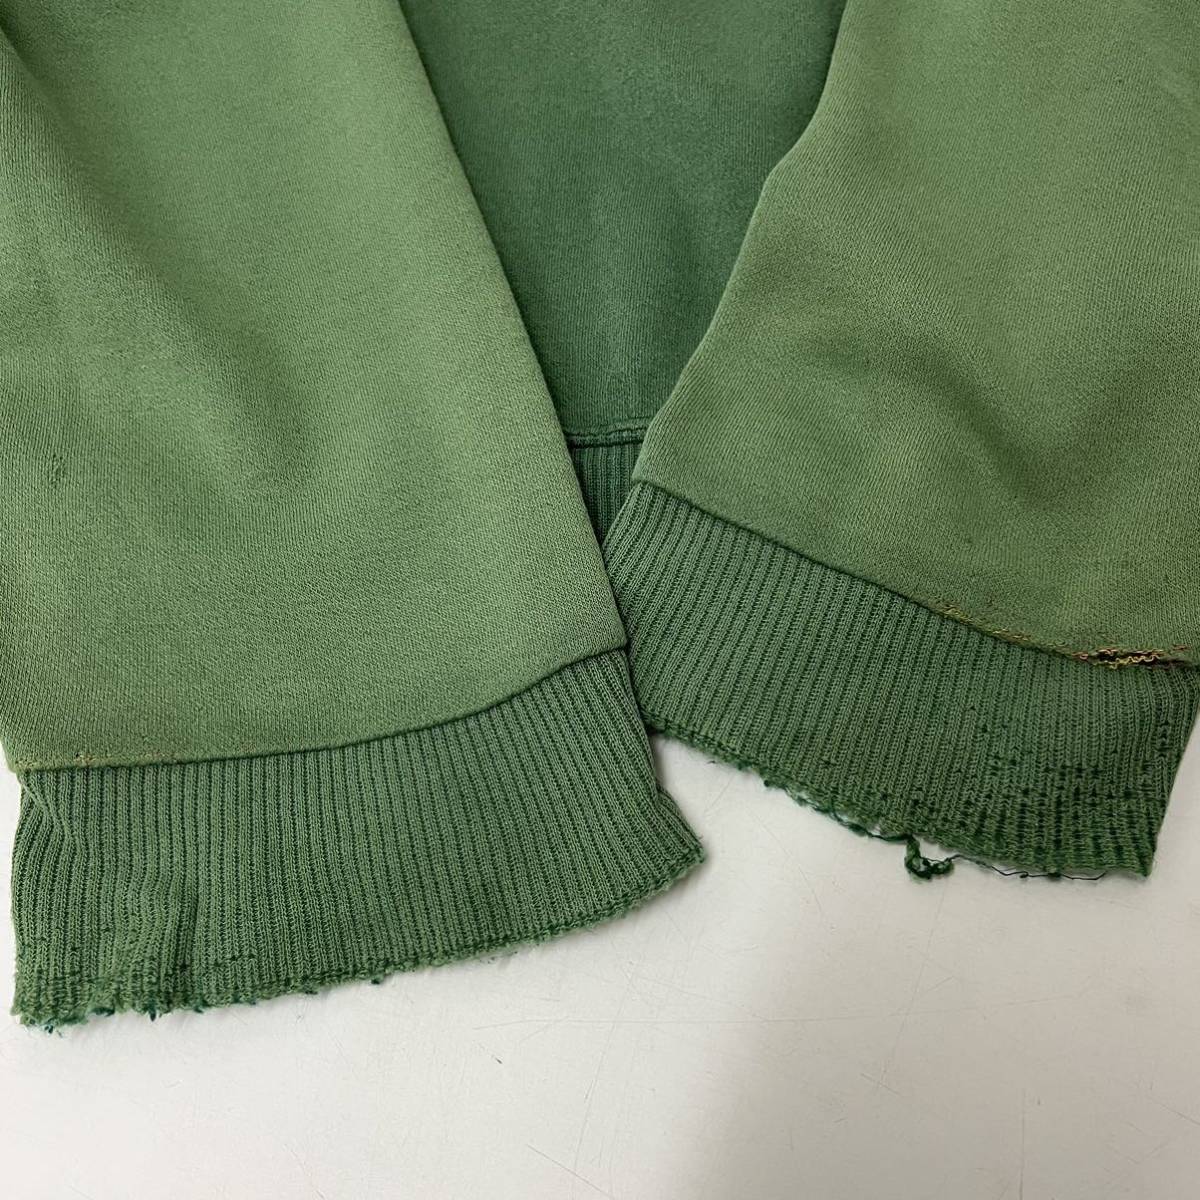 80s VINTAGE KENZO JEANS north . tag sweat sweatshirt te Caro go BORO ..BORO long sleeve cut and sewn green color Kenzo [ uniform carriage / including in a package possibility ]E